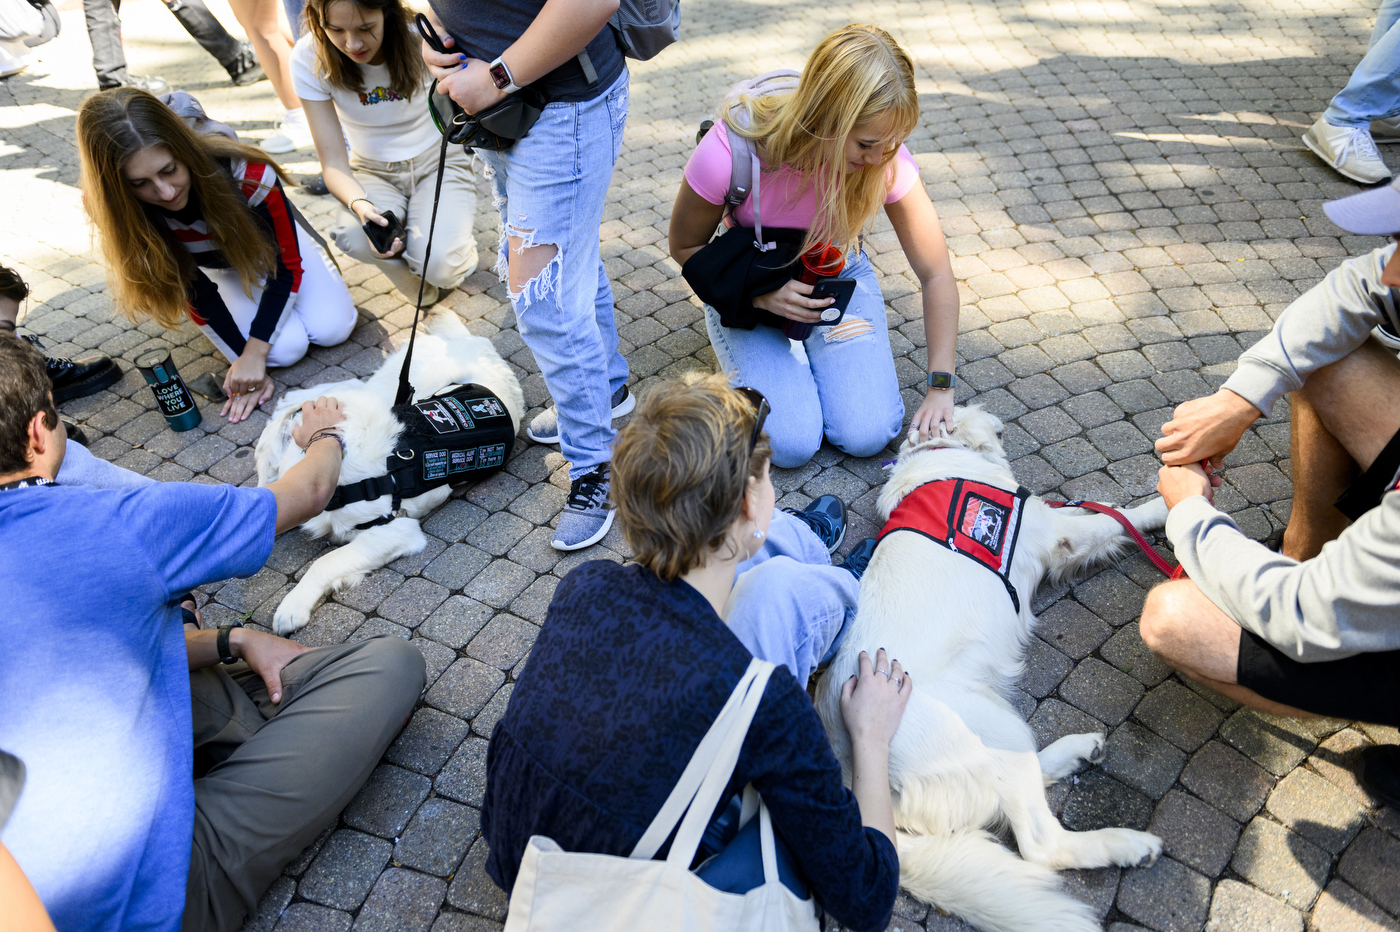 A group of people are petting service dogs.